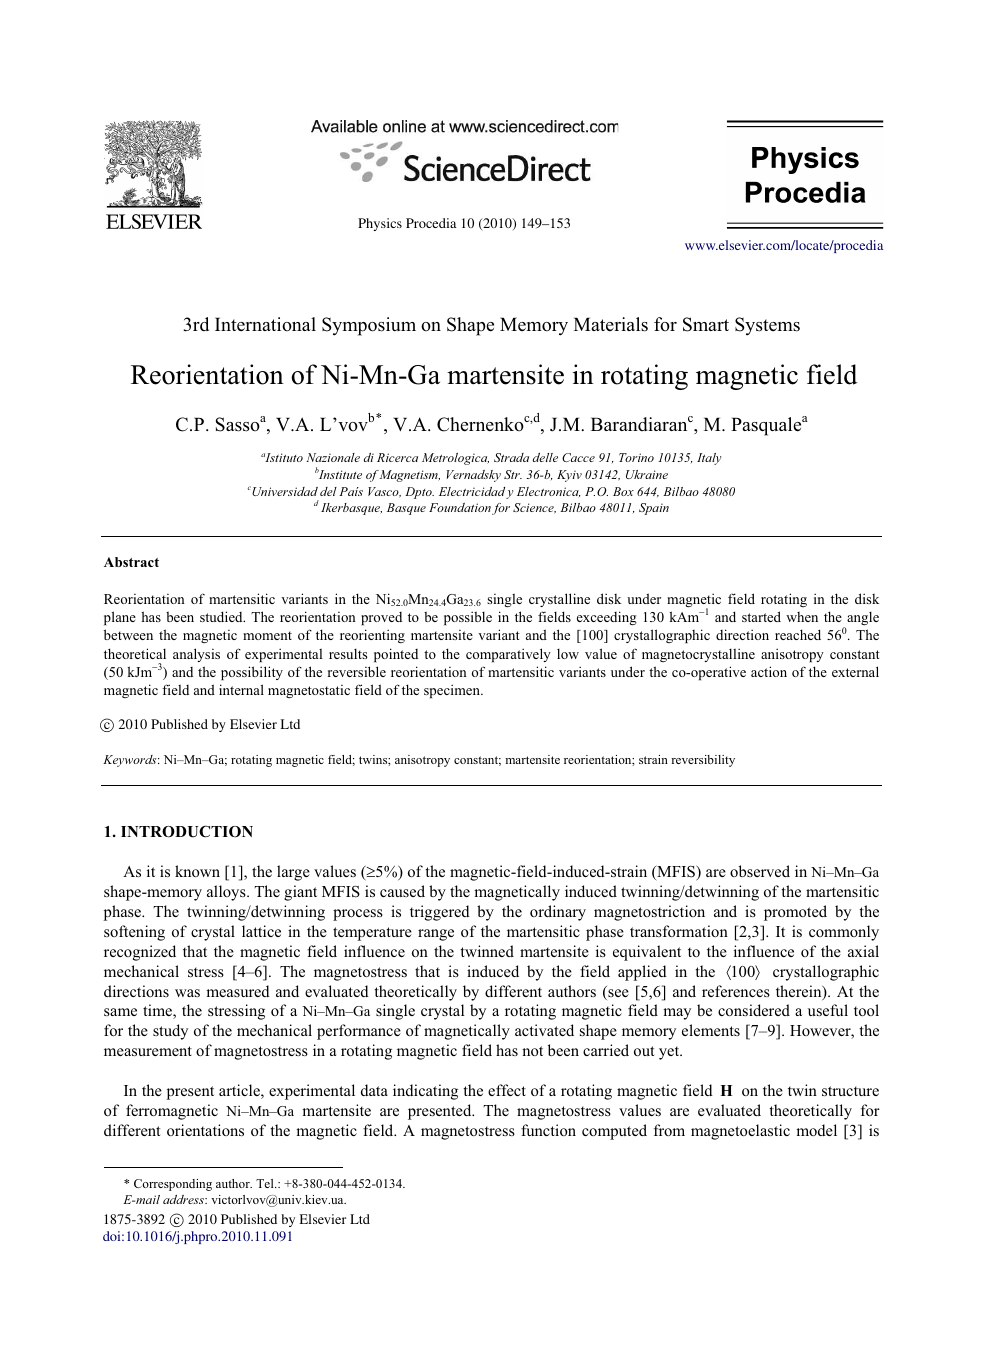 Reorientation Of Ni Mn Ga Martensite In Rotating Magnetic Field Topic Of Research Paper In Materials Engineering Download Scholarly Article Pdf And Read For Free On Cyberleninka Open Science Hub